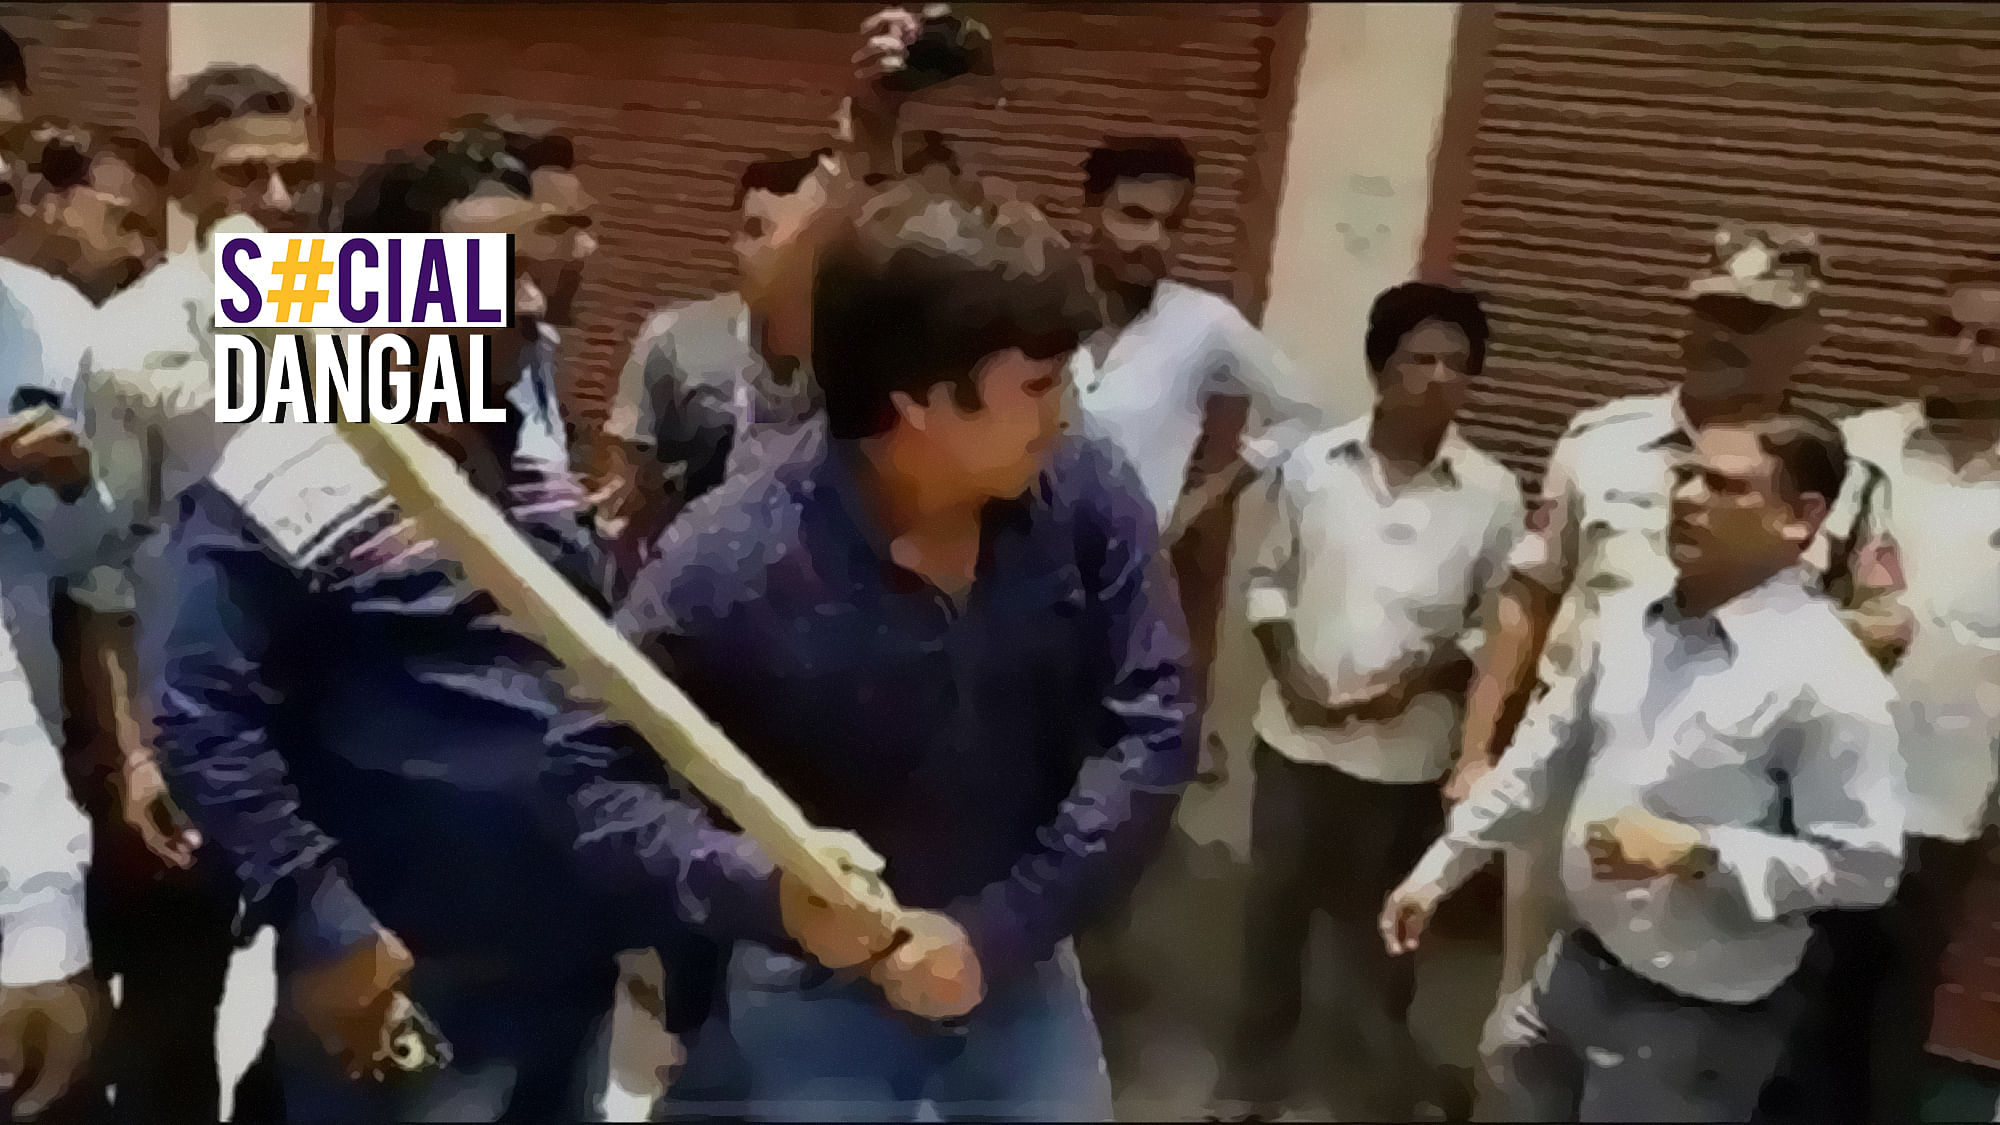 Kailash Vijayvargiya’s son Akash was arrested for assaulting a public official with a cricket bat.